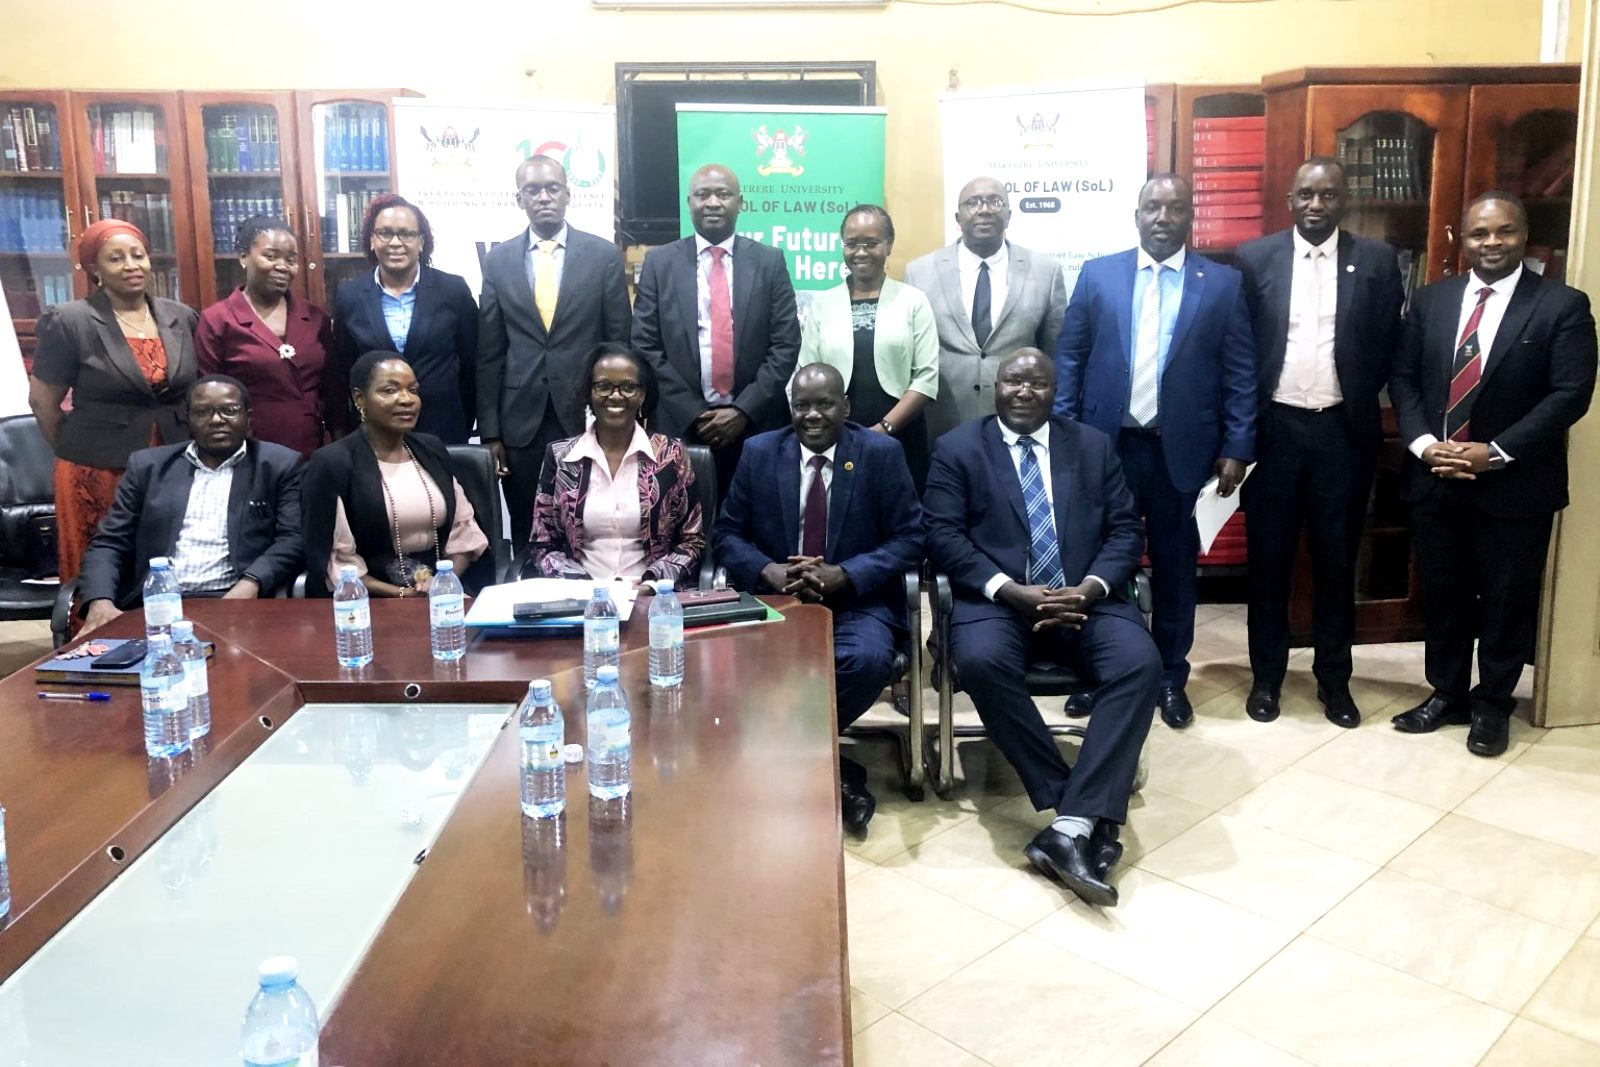 Front Row: The Chairperson, Mrs. Lorna Magara (C), Deputy Chairperson, Rt. Hon. Daniel Fred Kidega (2nd L), Ag. Principal, Prof. Ronald Naluwairo (R) with Members of Council and SoL Managers during the visit on 27th February 2023.